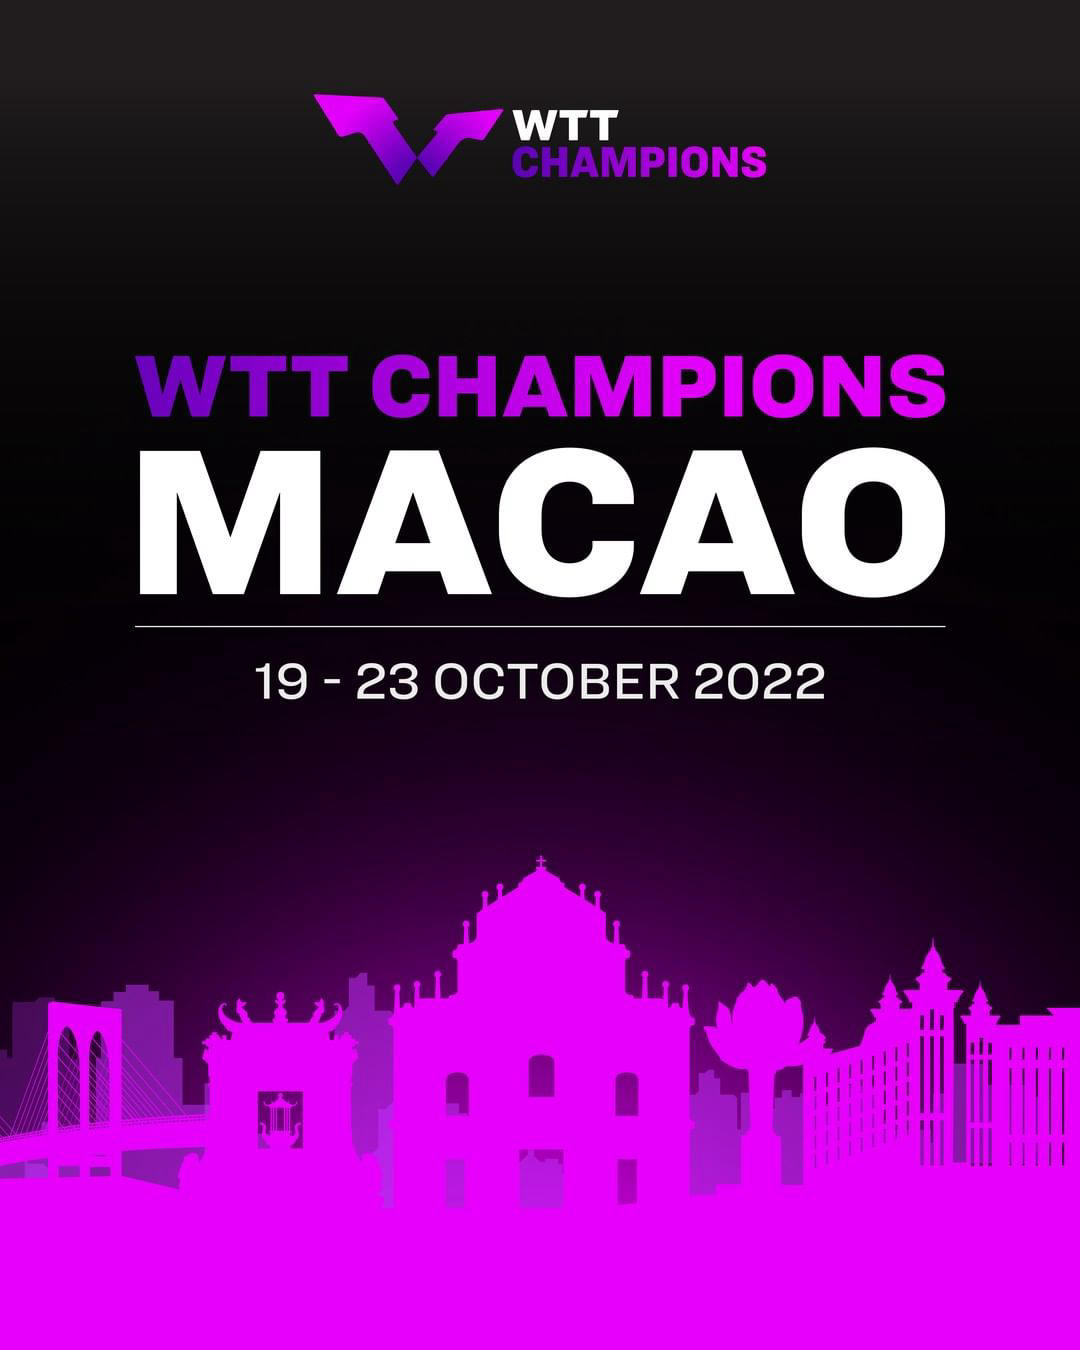 image  1 World Table Tennis - Get ready for an action packed October in China 🇨🇳 with #WTTMacao and #WTTXin